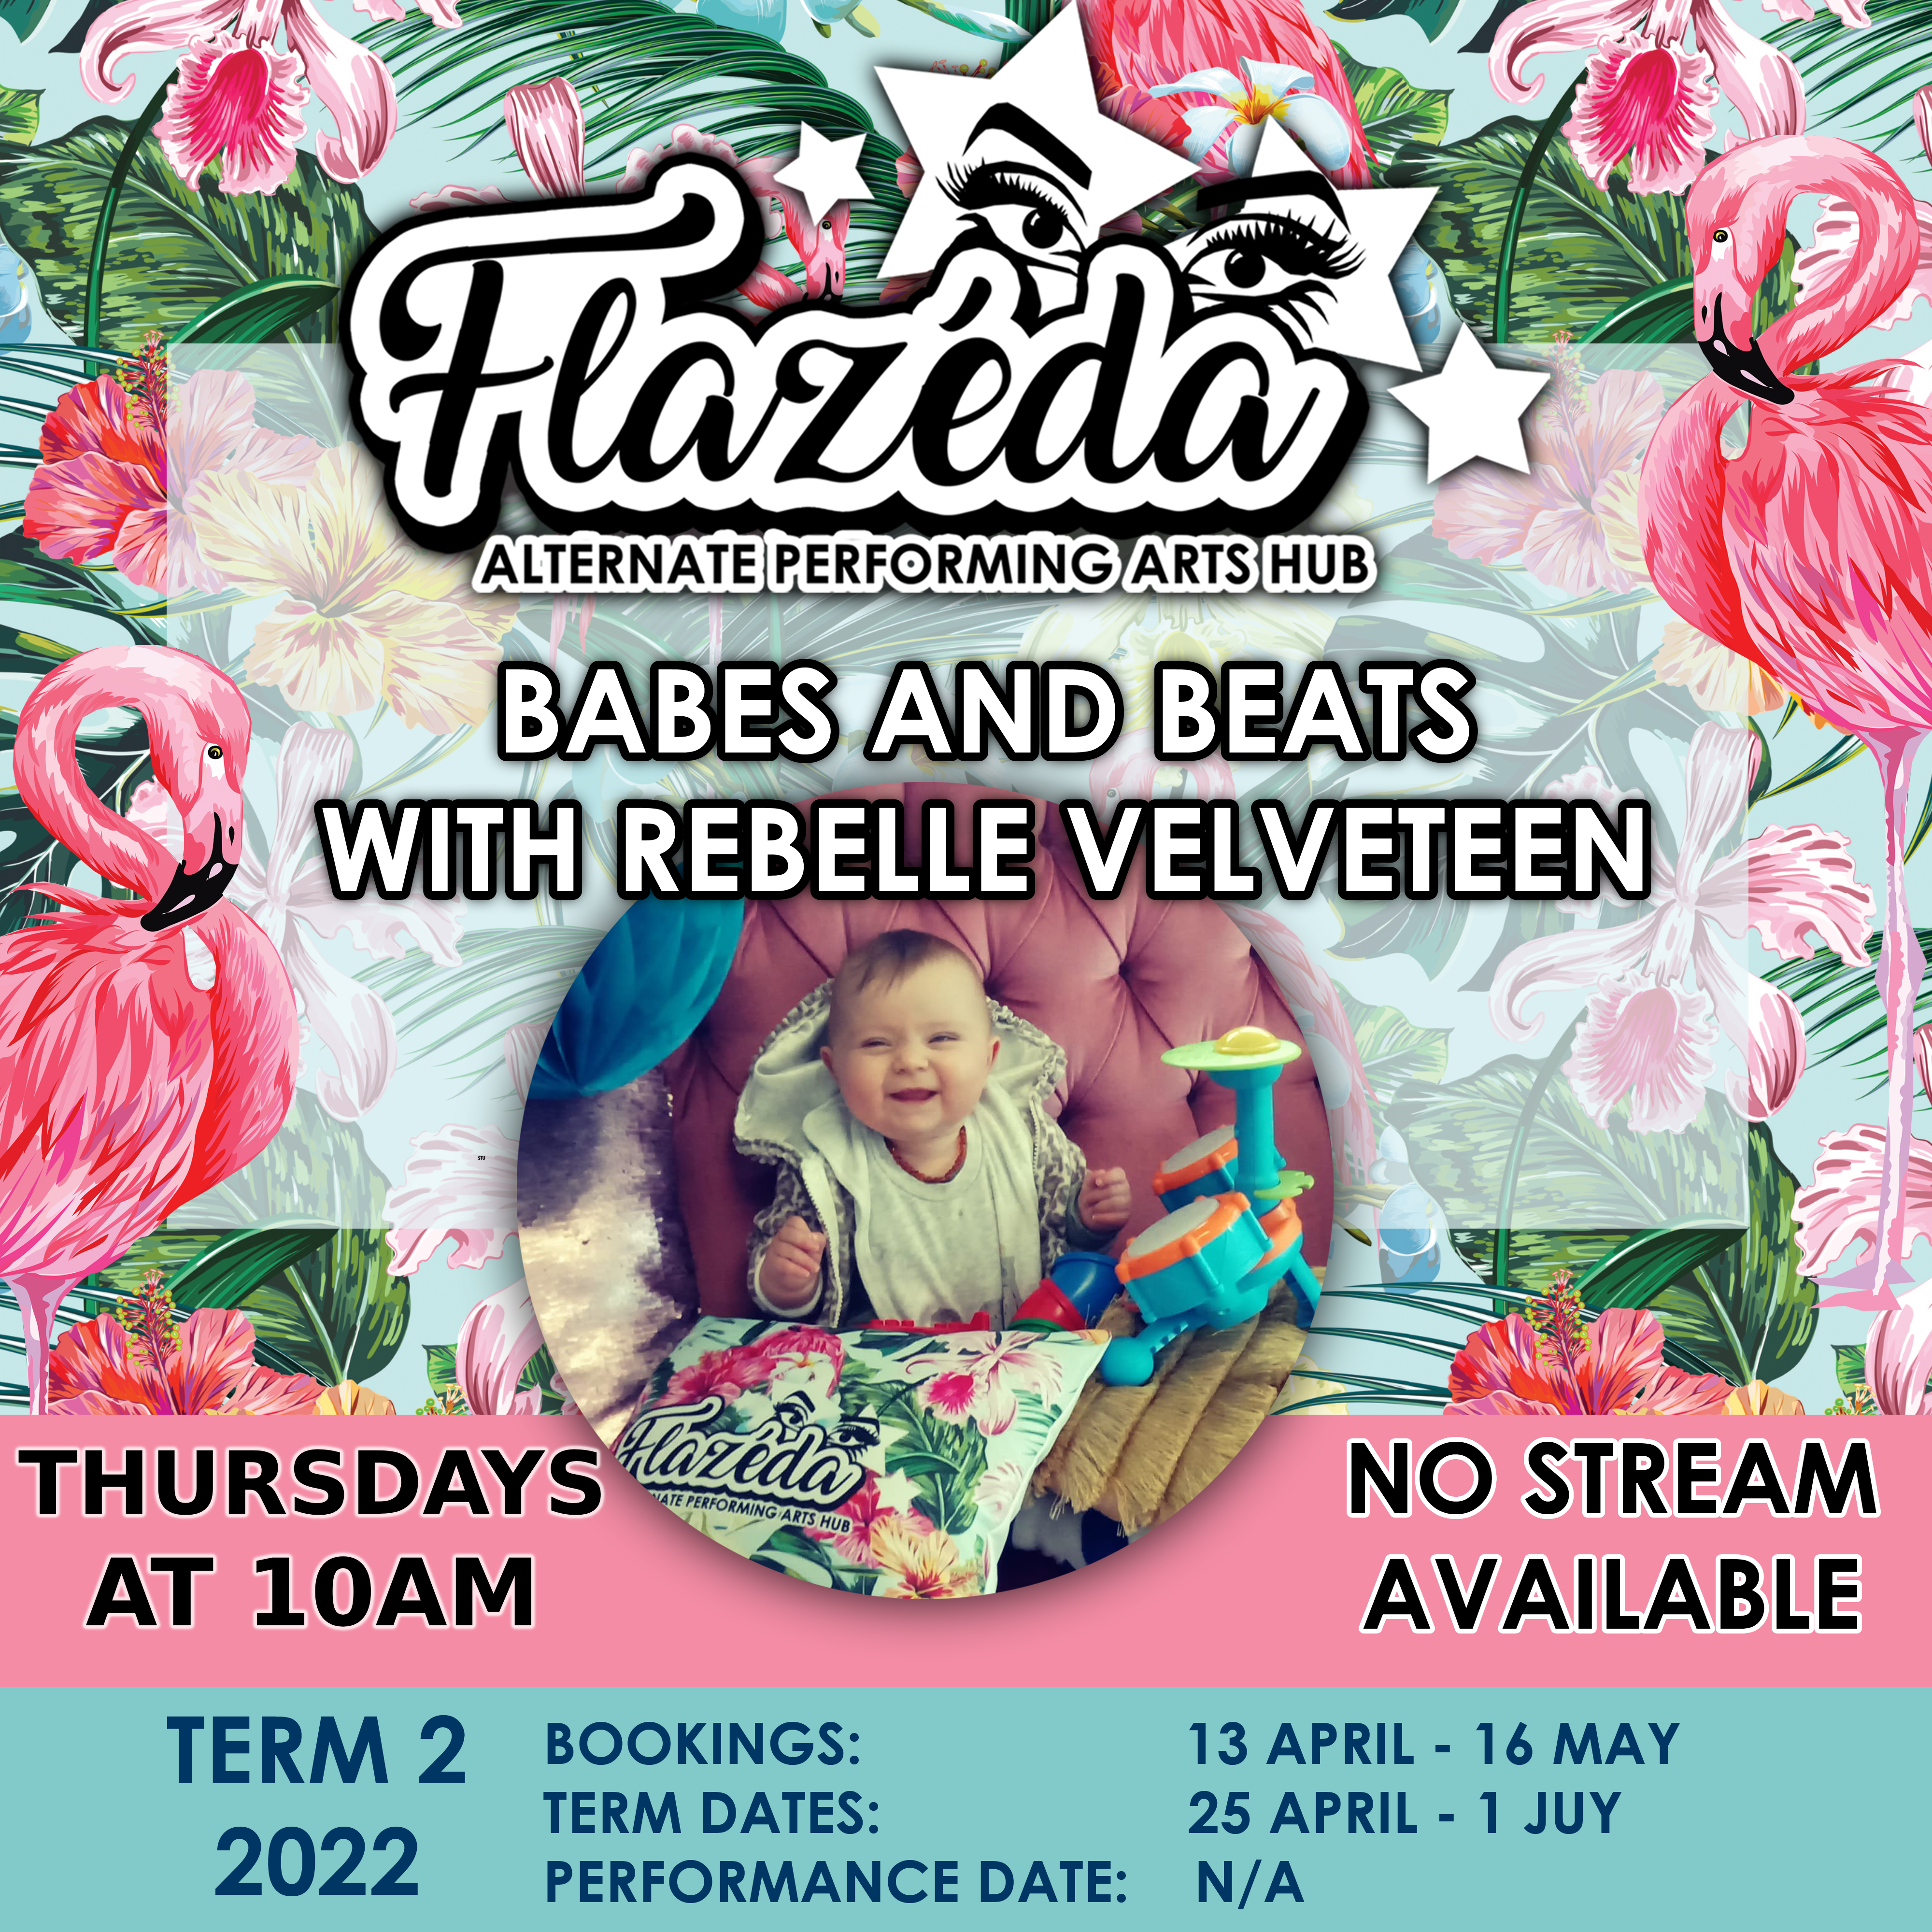 Babes & Beats with Rebelle Velveteen